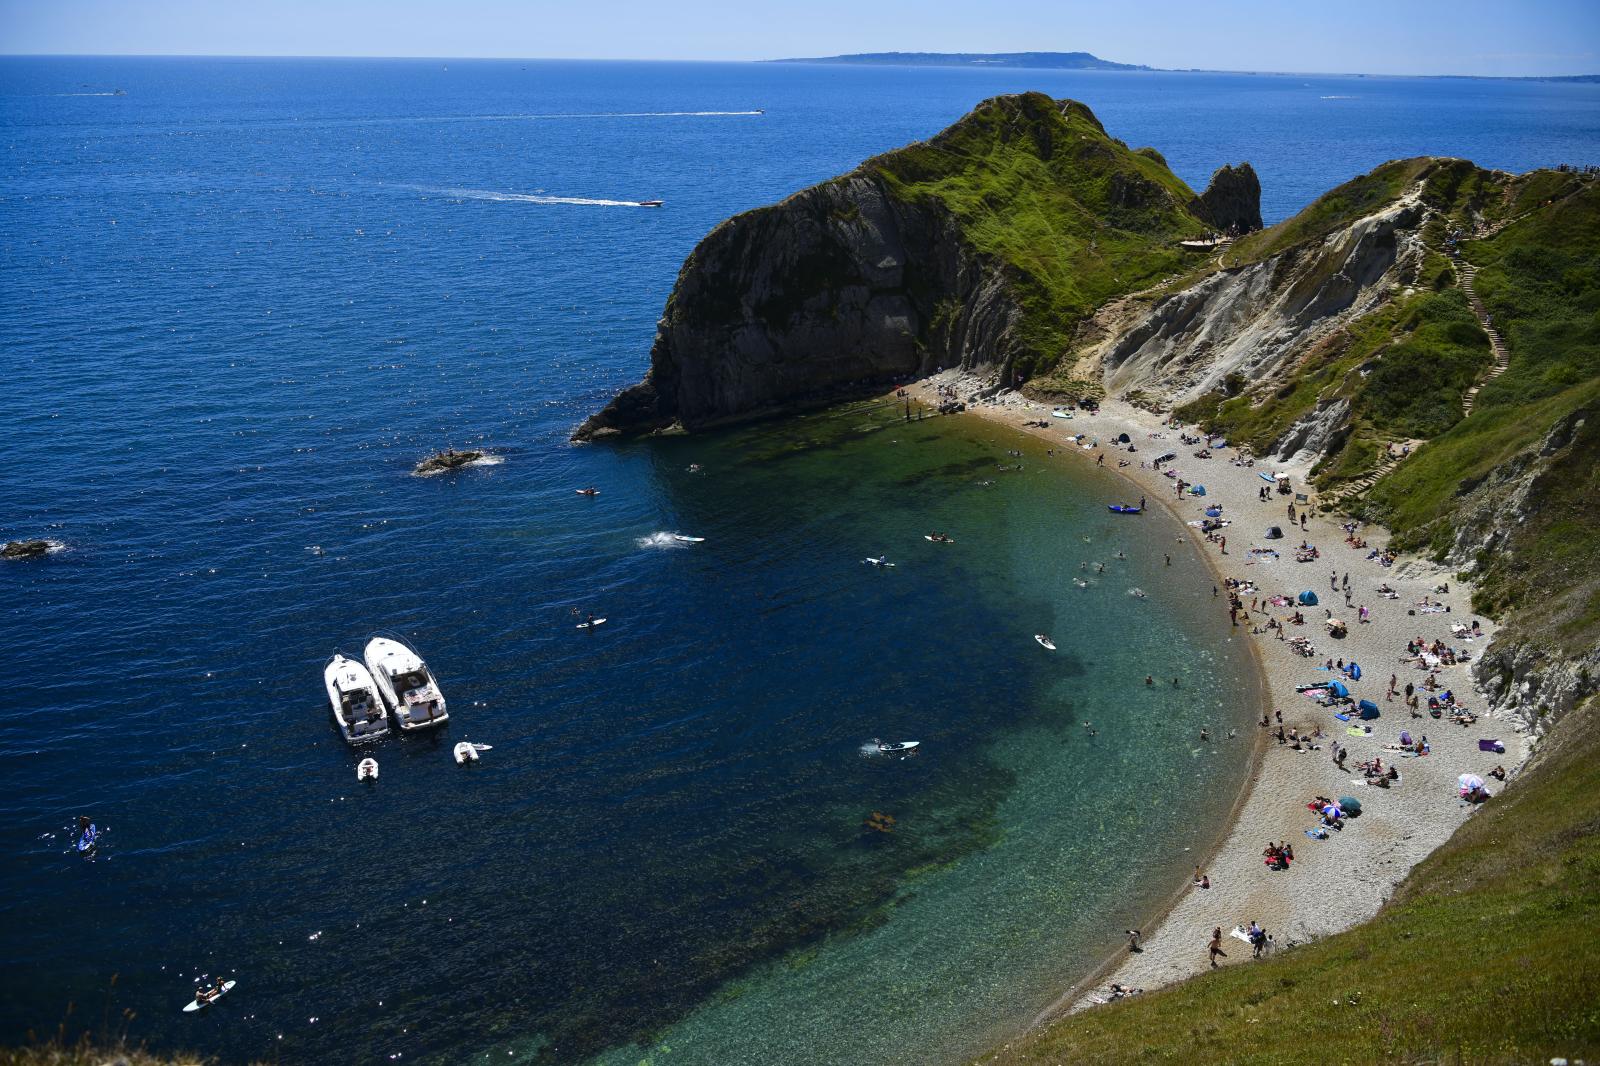 Image from Daily Life UK - Durdle Door